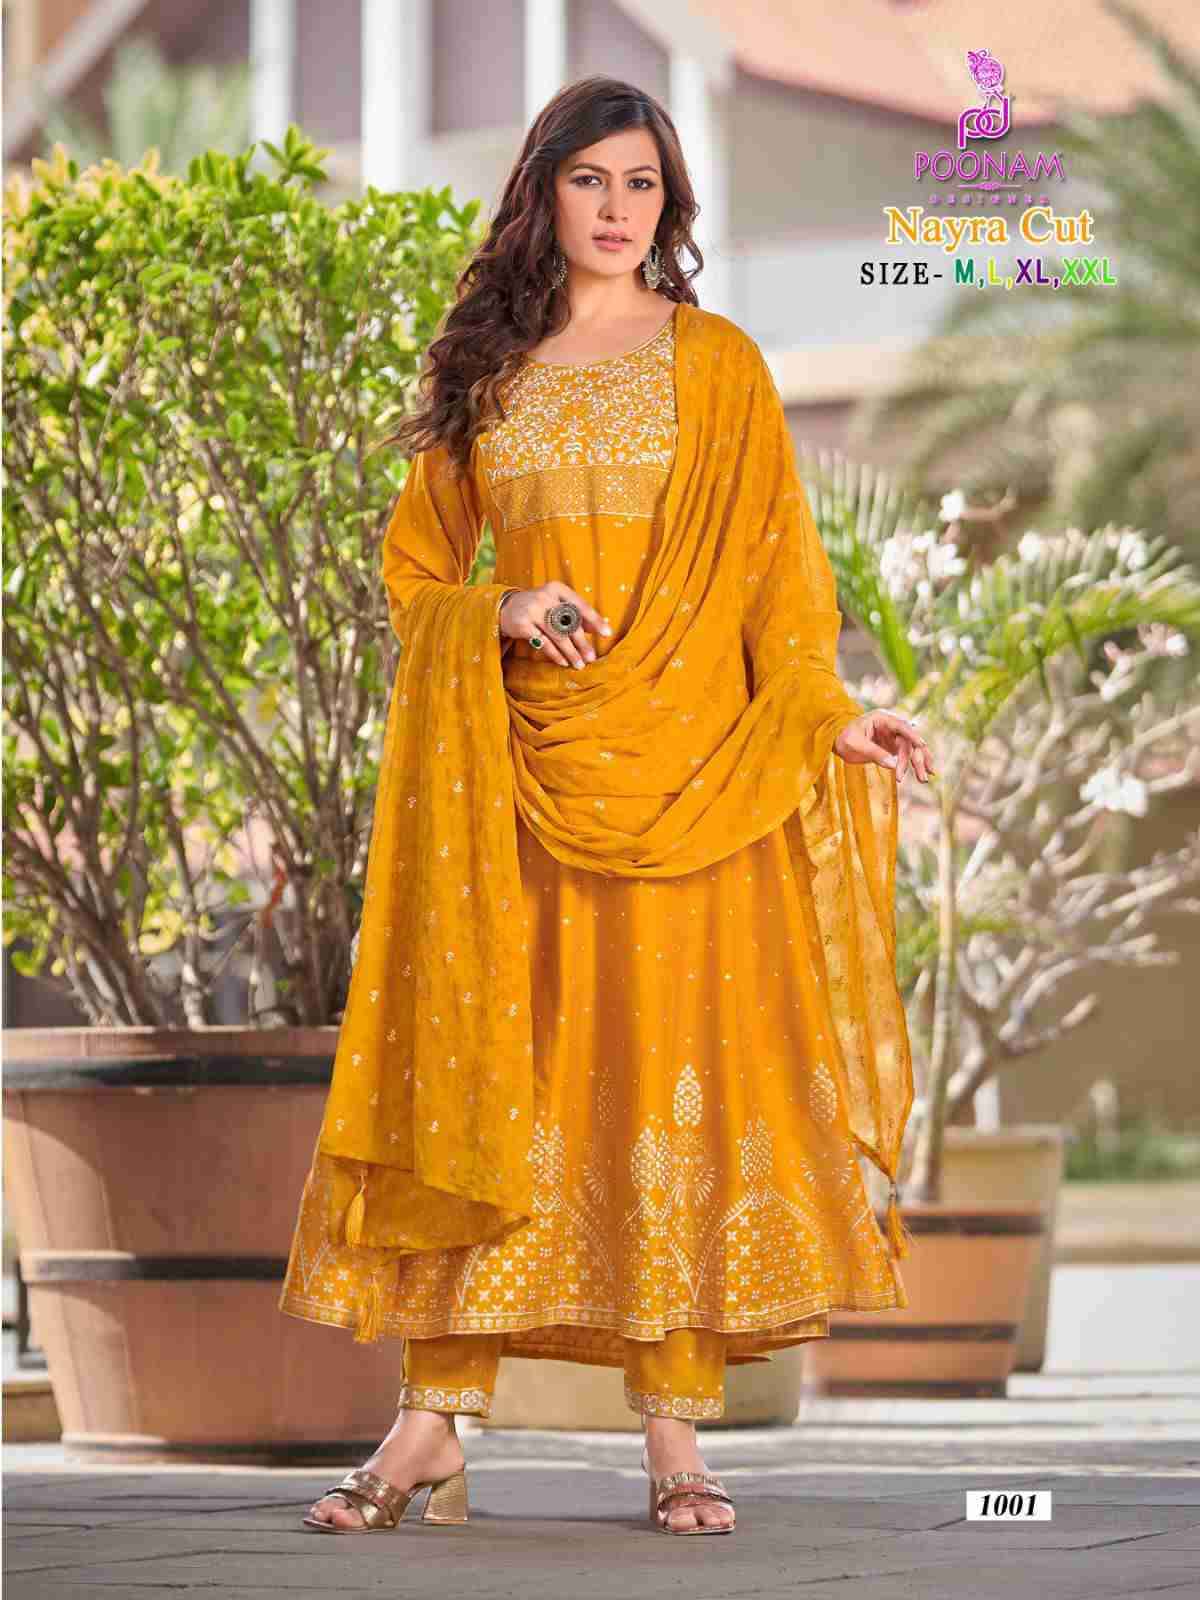 Poonam Designer Nayra Cut Pure Rayon Festive Wear Nayra Cut Dress New Collection